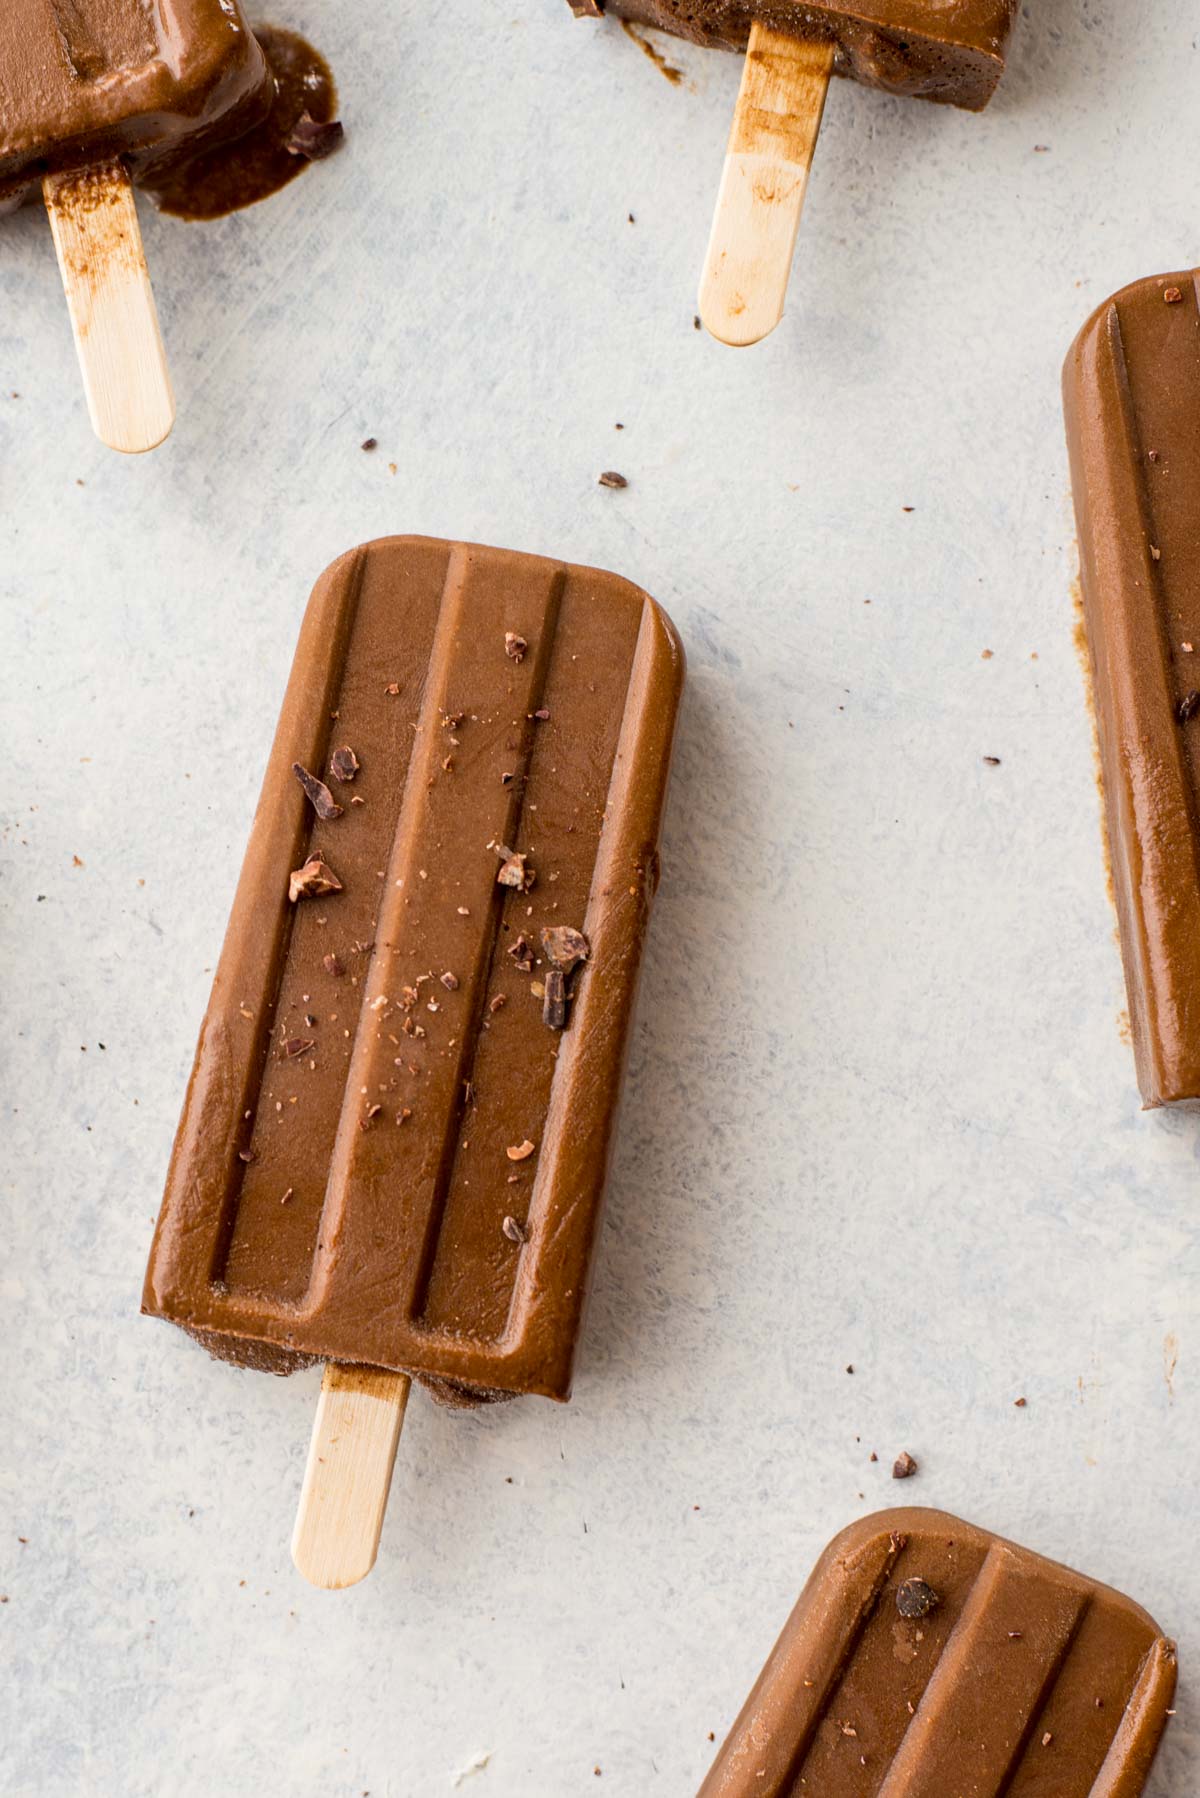 Fudgesicles loaded with hormonal balancing vital nutrients that will end all cravings.